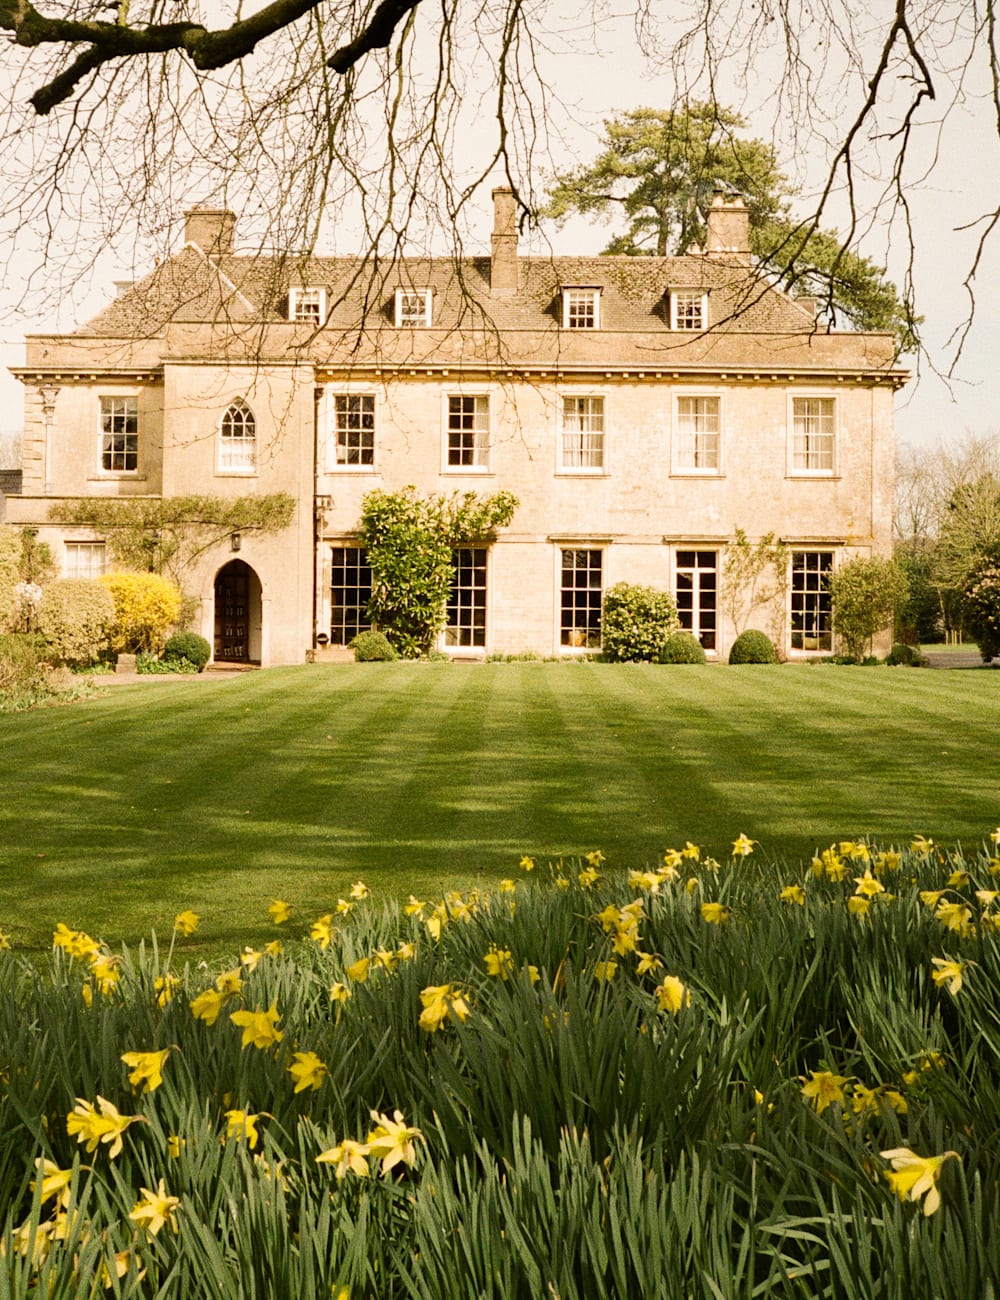 Hotel exterior and lawn through the daffodils 